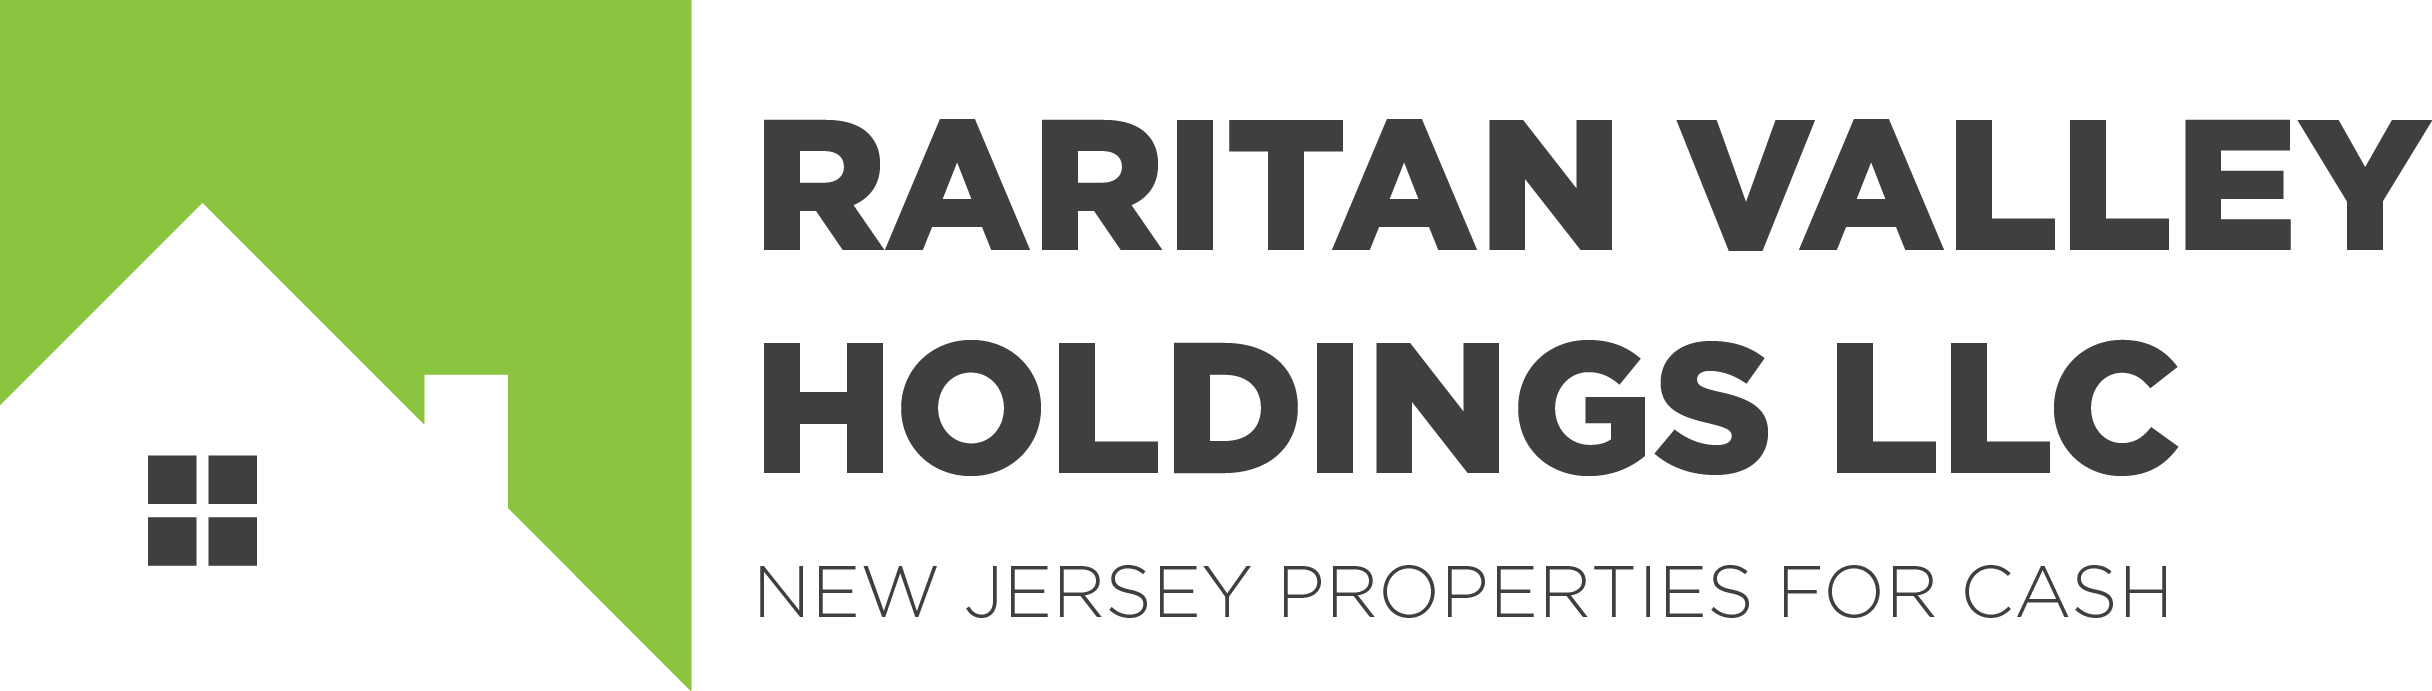 Raritan Valley Holdings LLC Sees Rent to Own and Lease